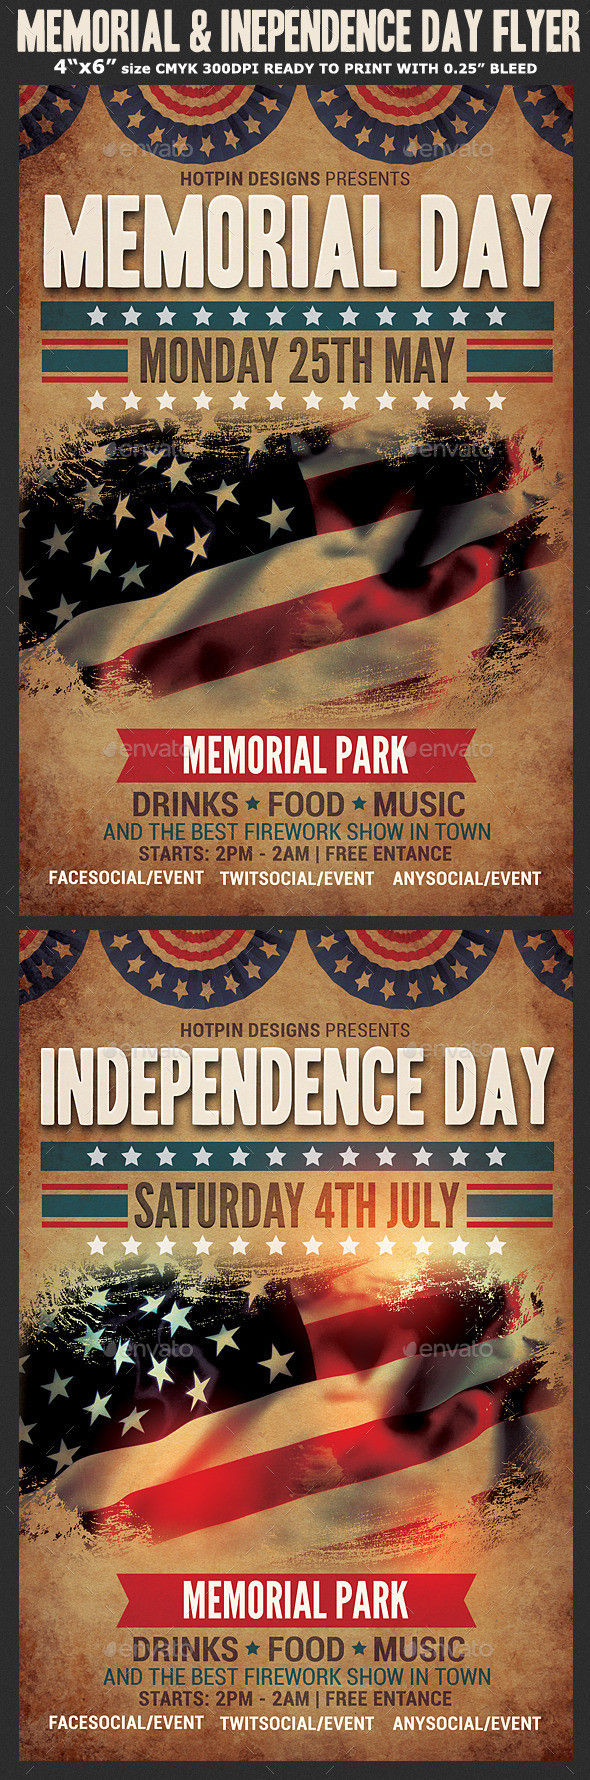 Memorial indpendence day flyer template preview